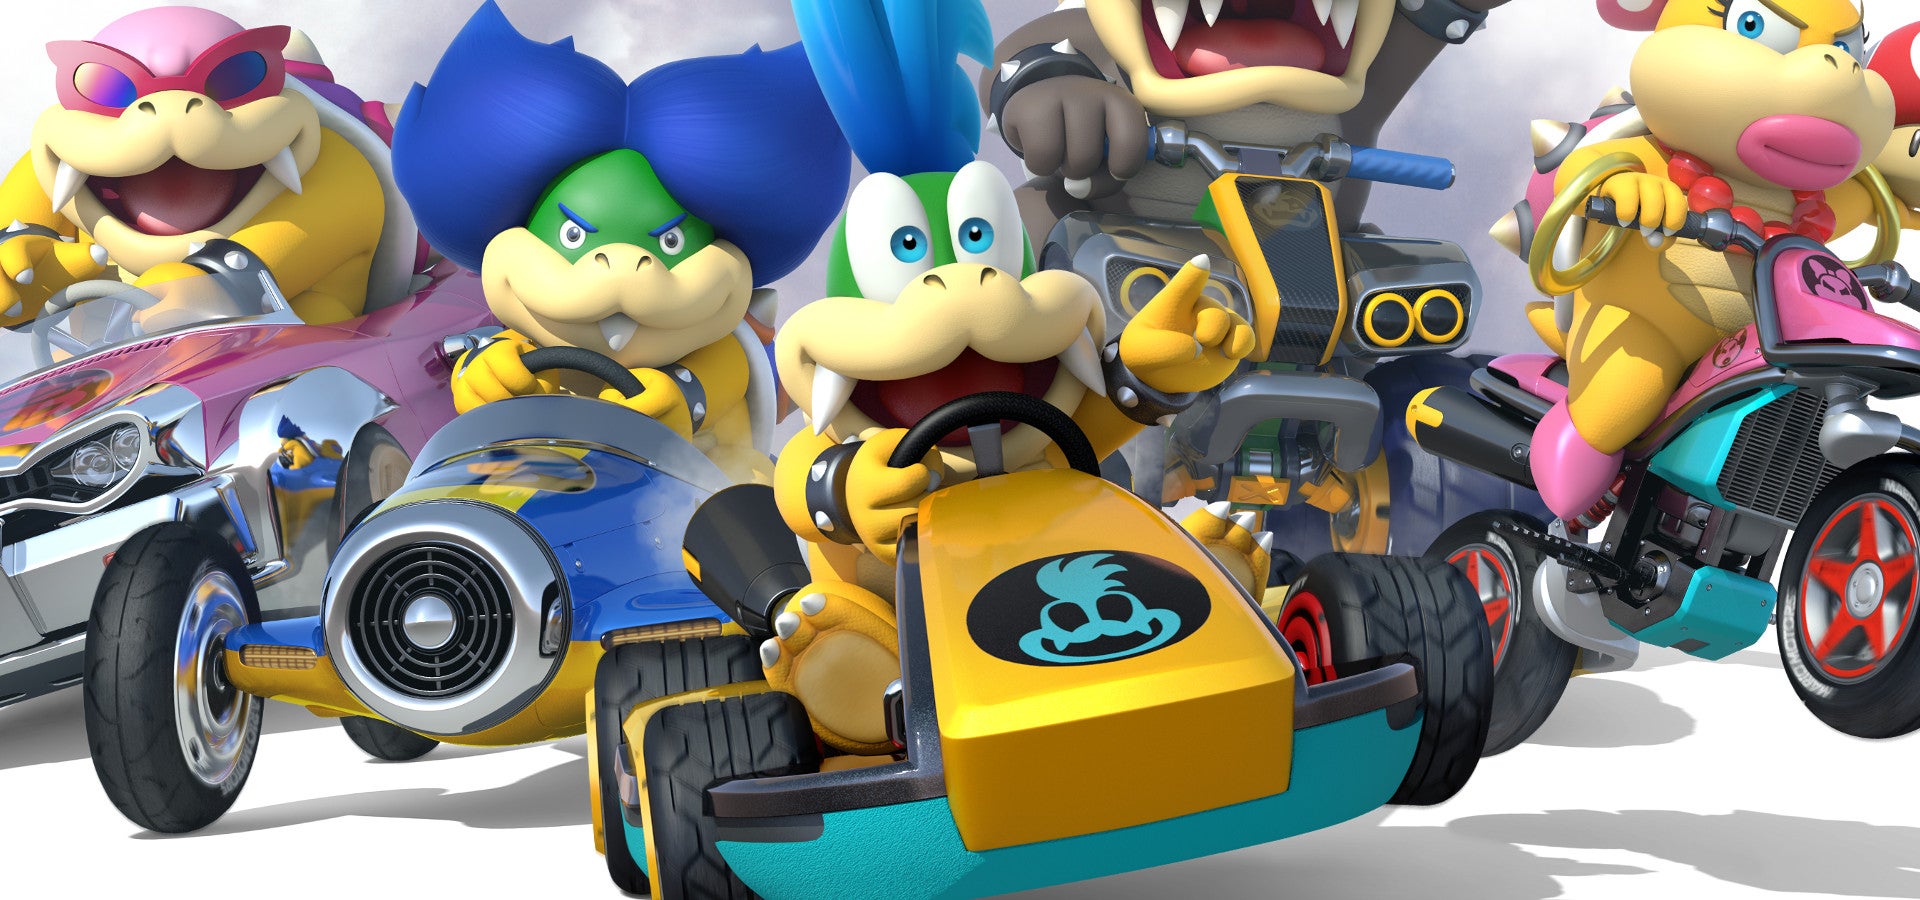 Image for Mario Kart 8 reviews are go, get all the scores here